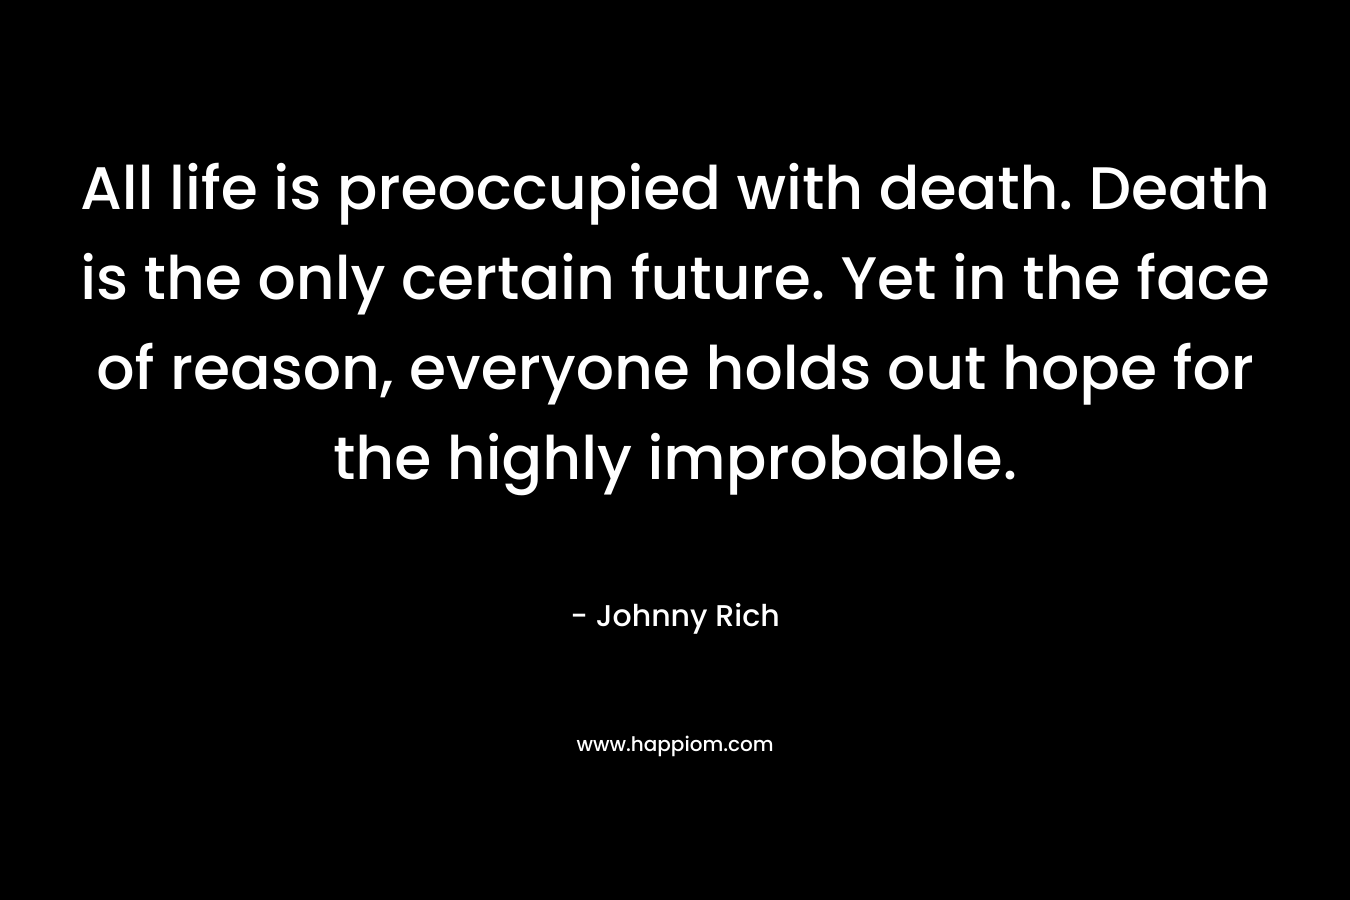 All life is preoccupied with death. Death is the only certain future. Yet in the face of reason, everyone holds out hope for the highly improbable.